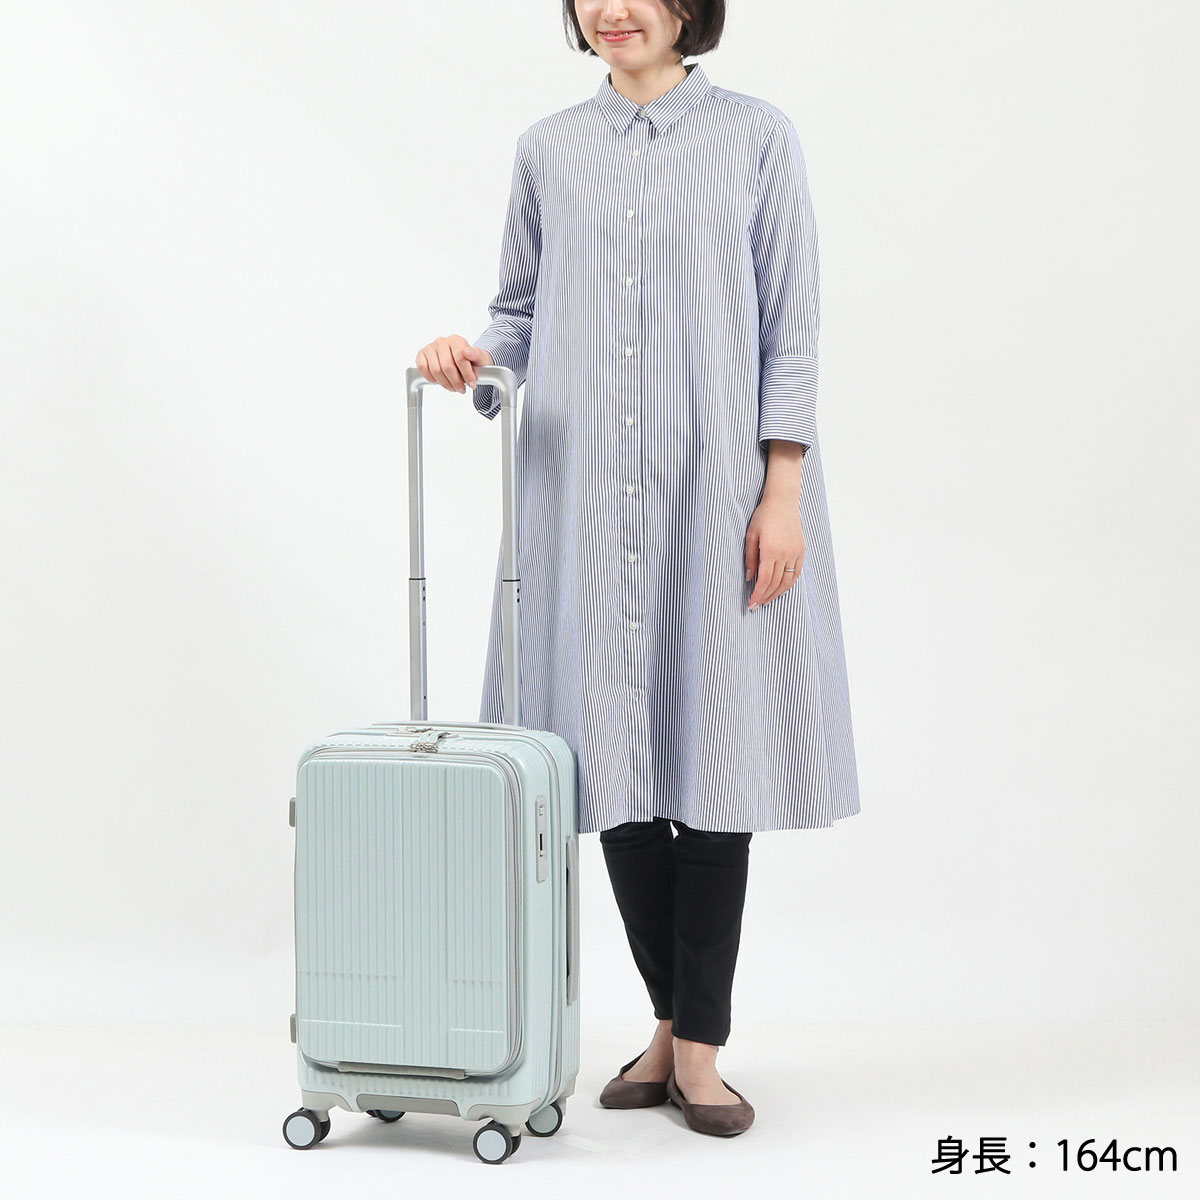  maximum 44%*5/18.19 limitation regular goods 2 year guarantee ino Beta - suitcase machine inside bringing in front open S size innovator Carry case light weight stopper quiet sound INV50